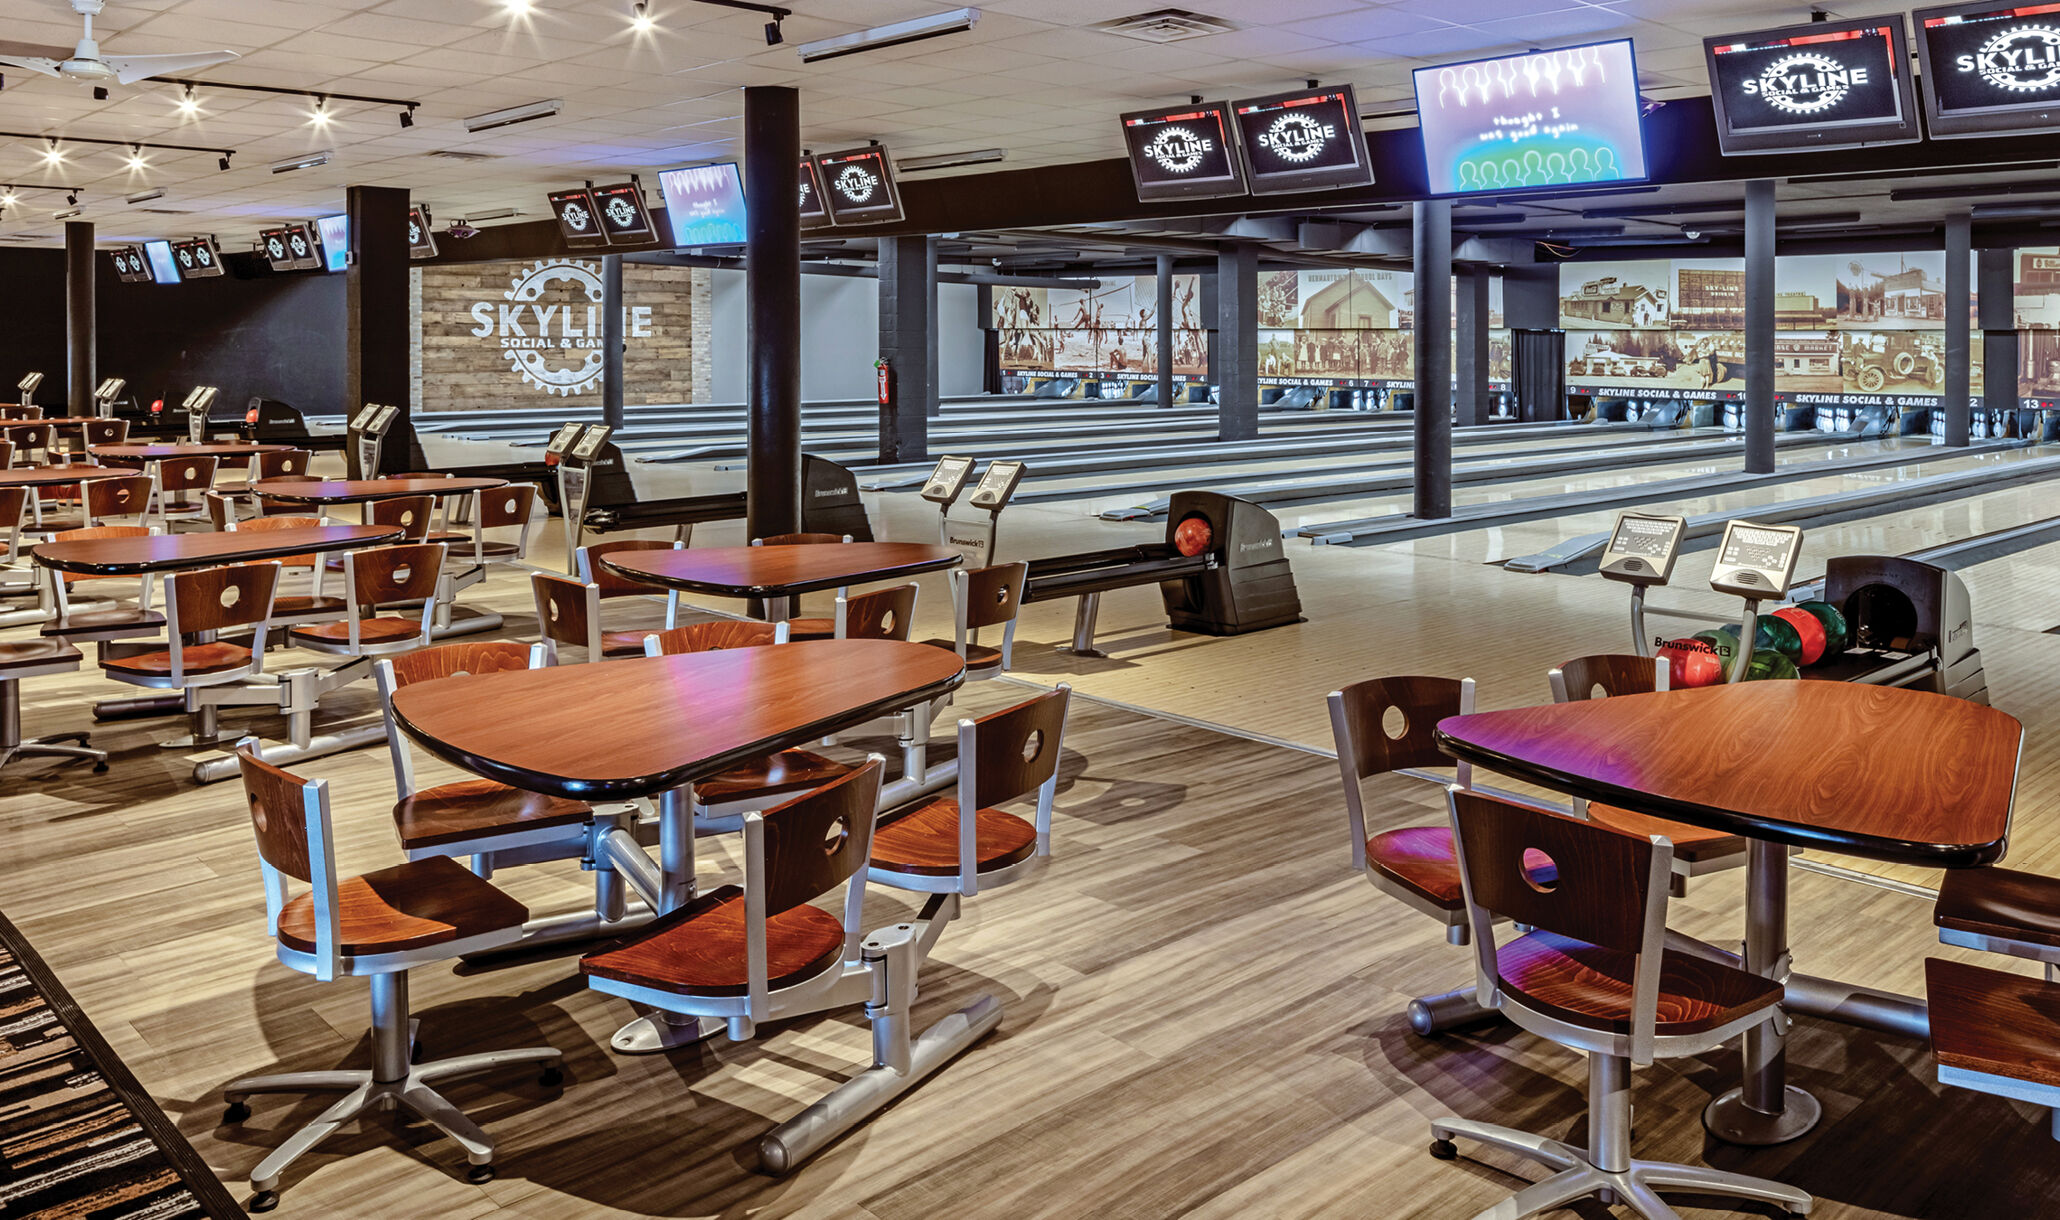 Skyline Social, Hermantown, MN - Bowlers area and lanes-2